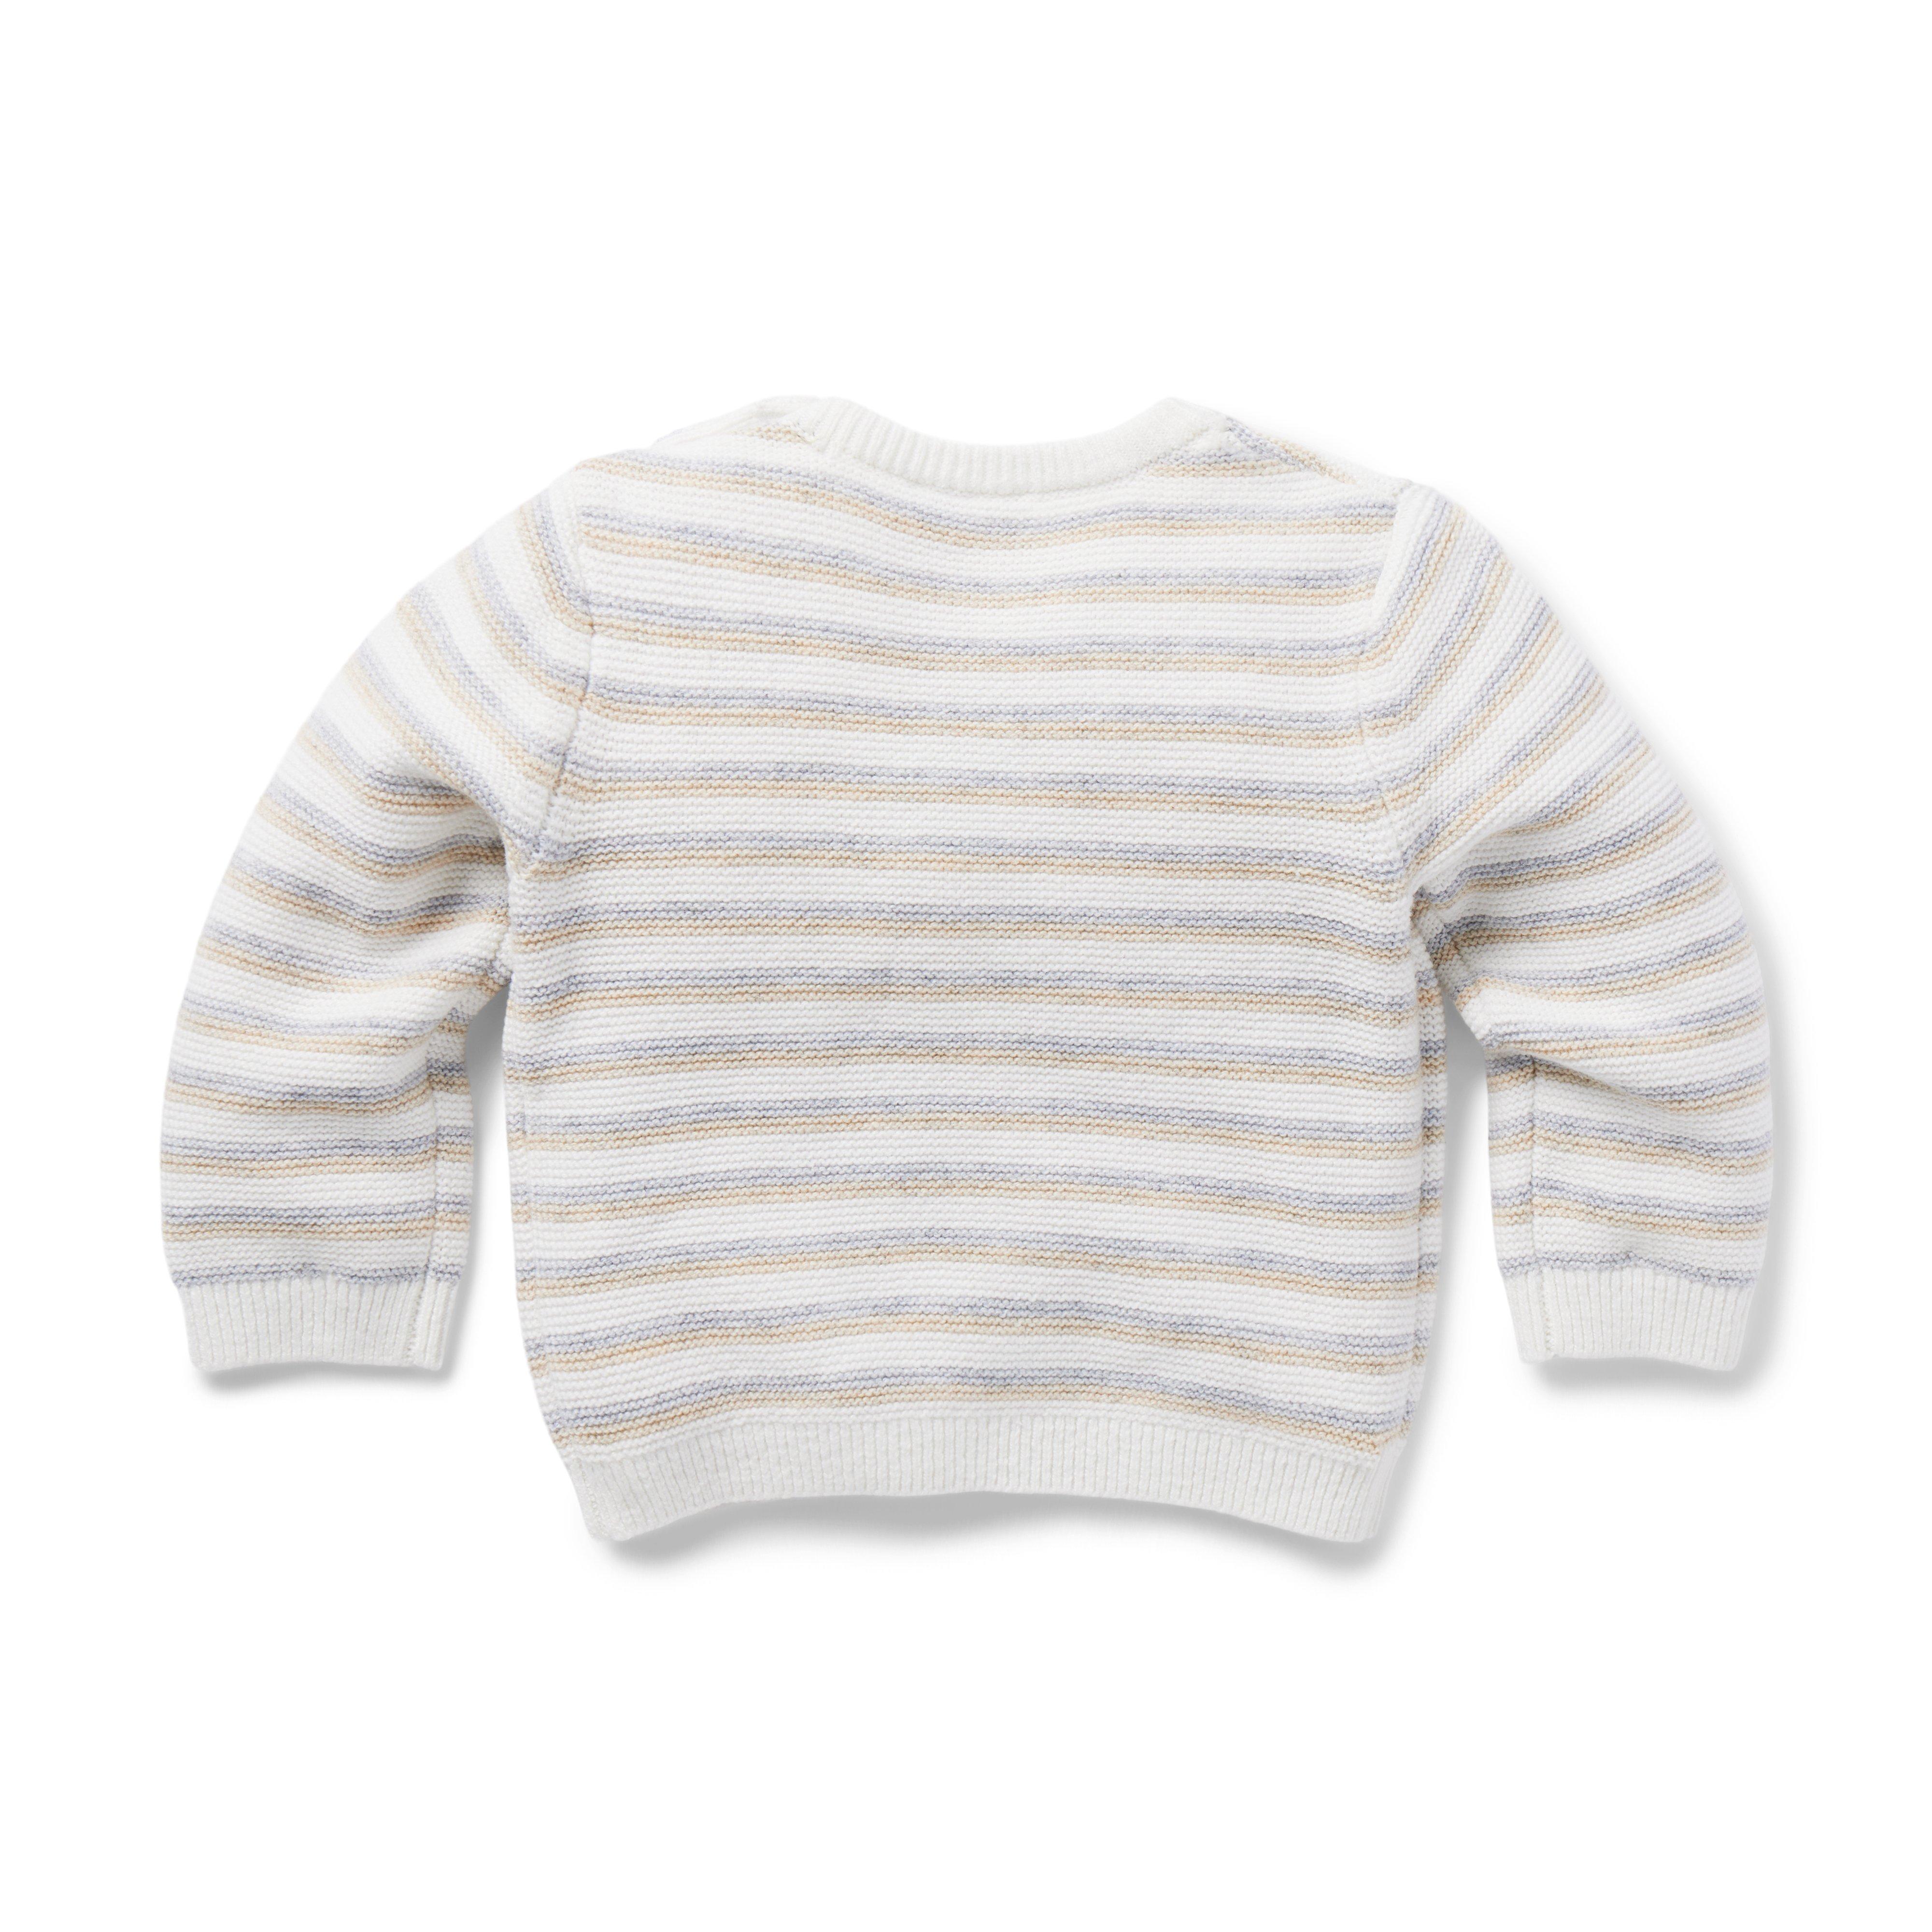 Baby Striped Sweater image number 3